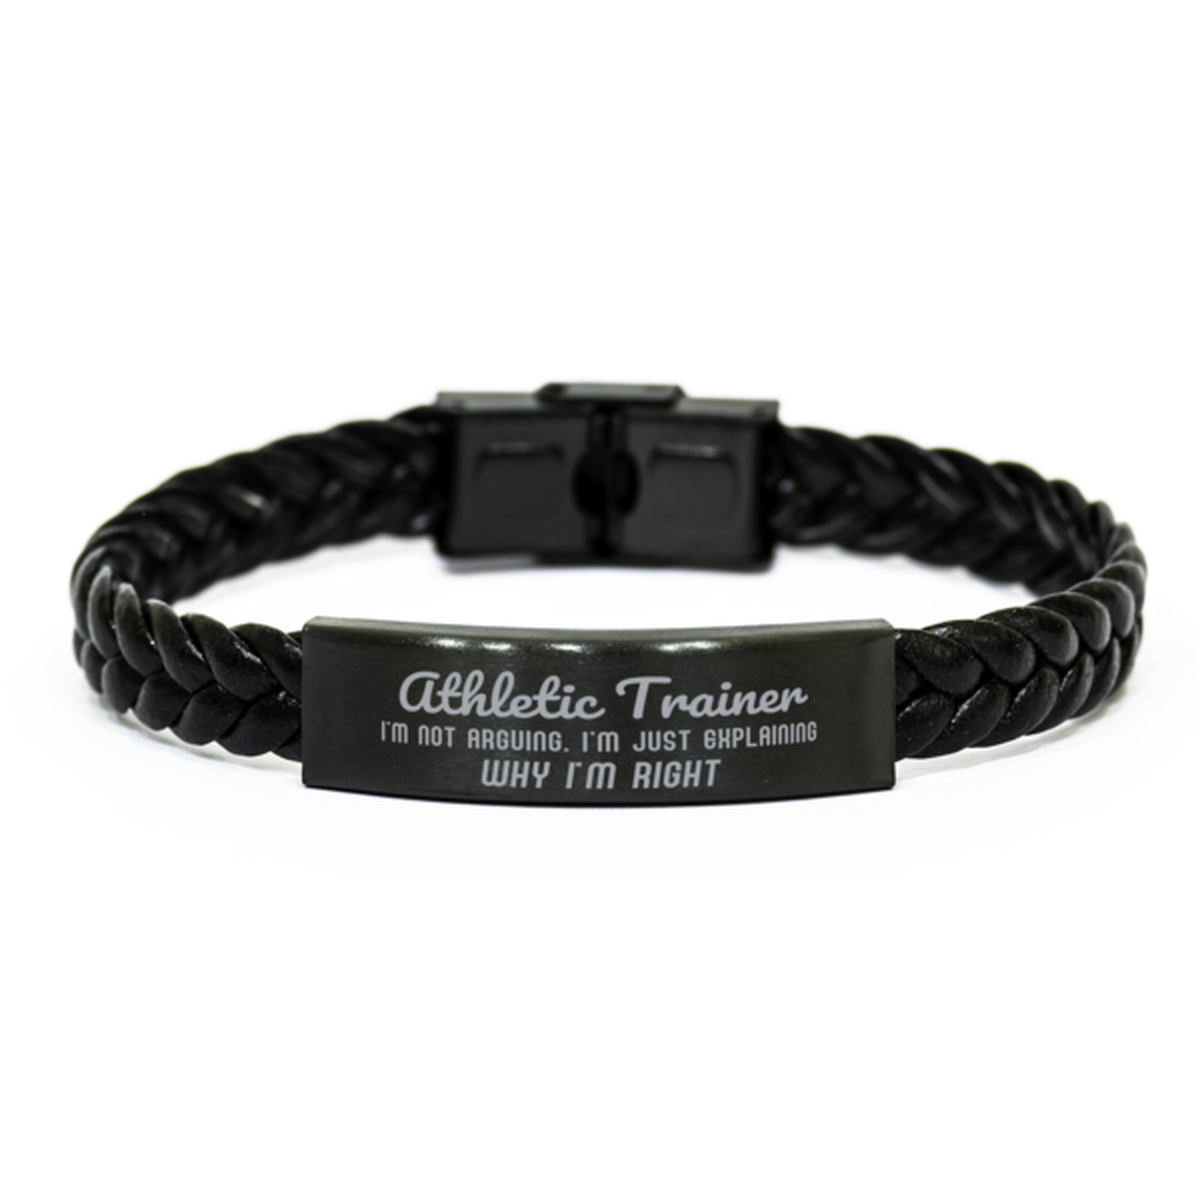 Athletic Trainer I'm not Arguing. I'm Just Explaining Why I'm RIGHT Braided Leather Bracelet, Graduation Birthday Christmas Athletic Trainer Gifts For Athletic Trainer Funny Saying Quote Present for Men Women Coworker